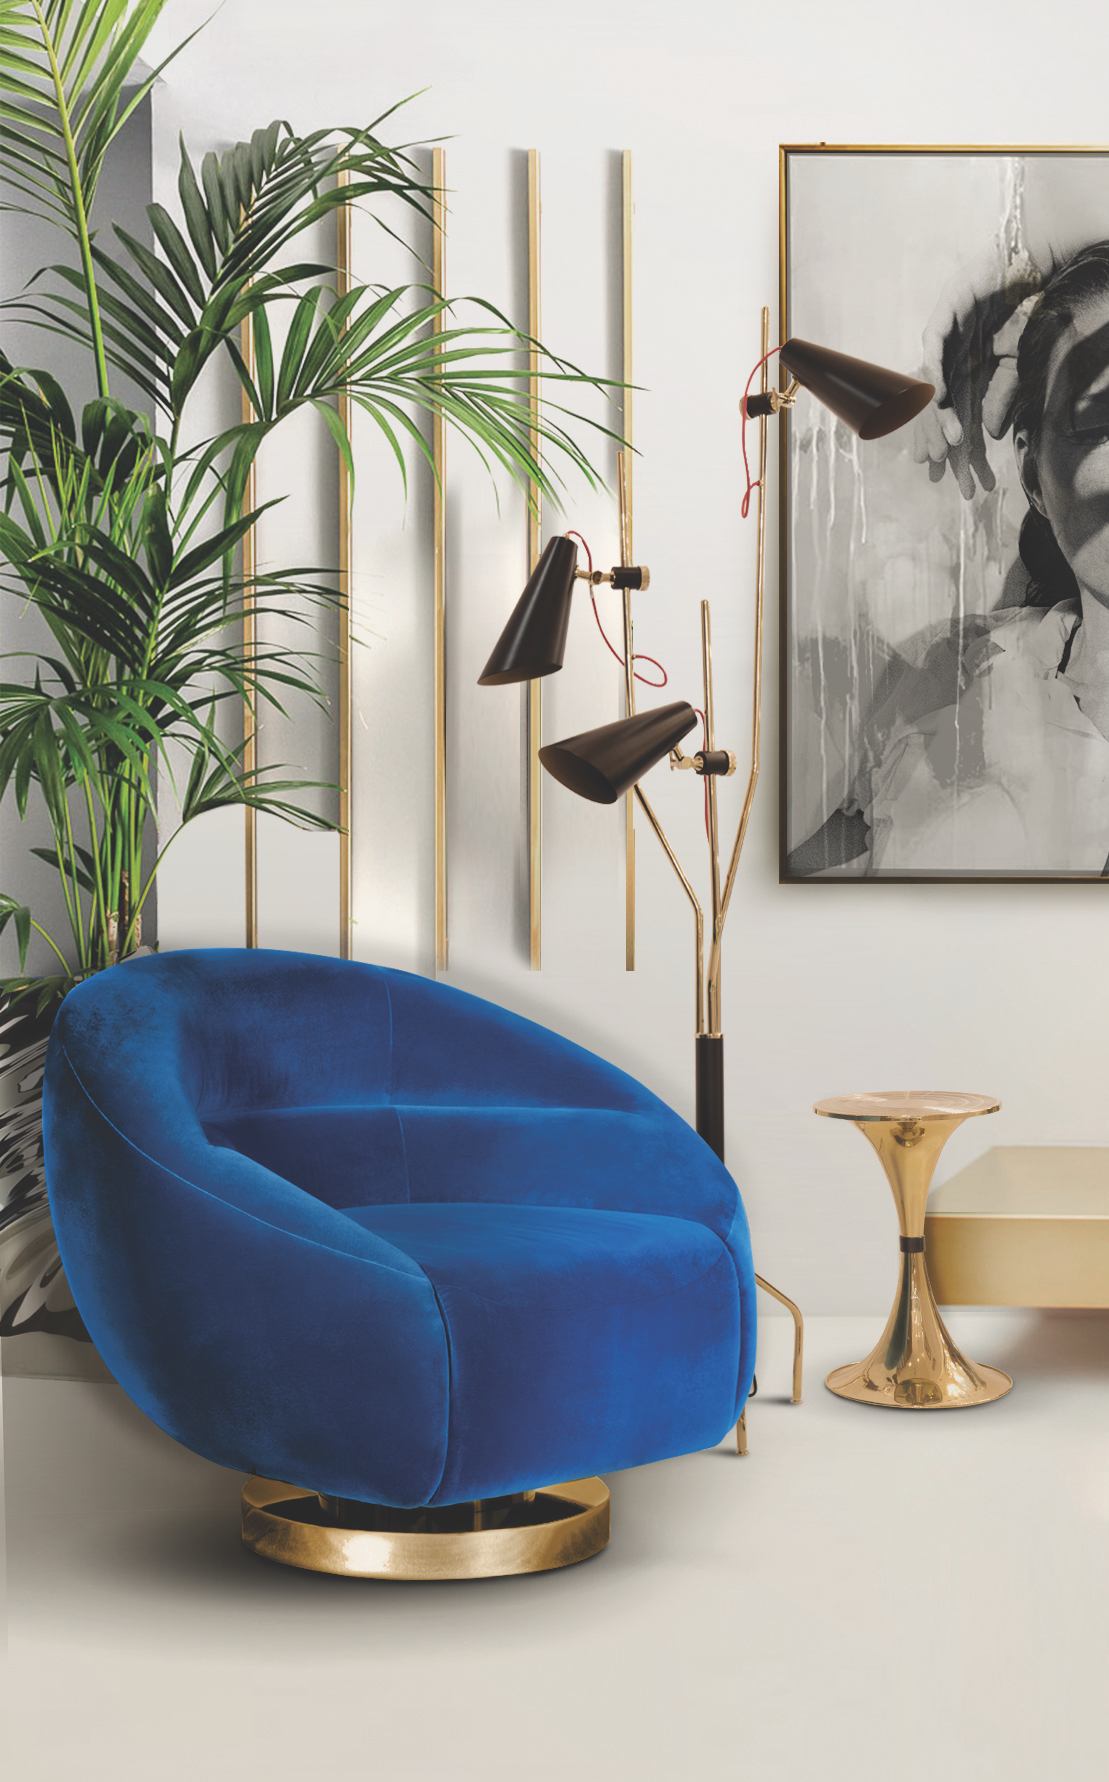 Mood Board- Using Lapis Blue on Your Mid-Century Furniture